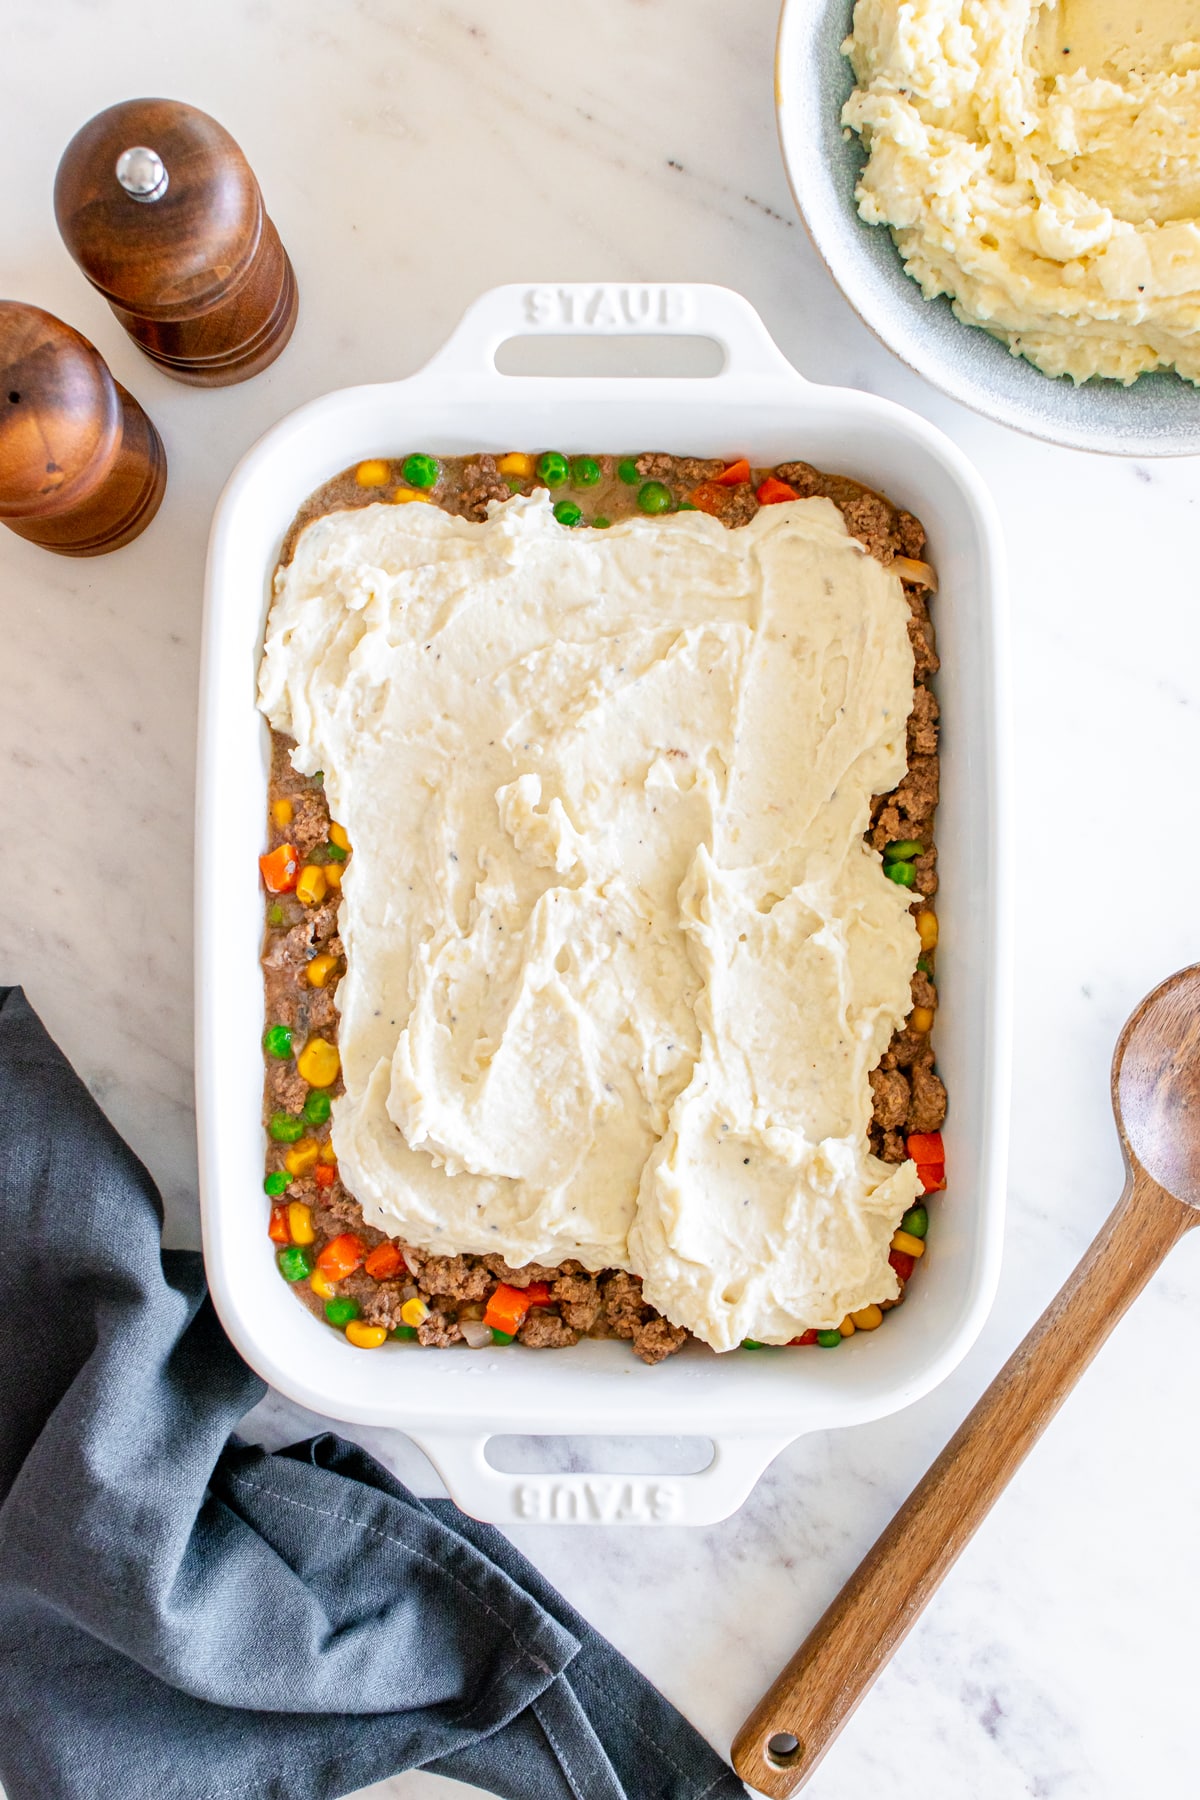 A shepherd's pie in a white baking dish, before being baked, with mashed potatoes on top of the meat and vegetable layer, next to wooden salt and pepper mills and a bowl of extra mashed potatoes.